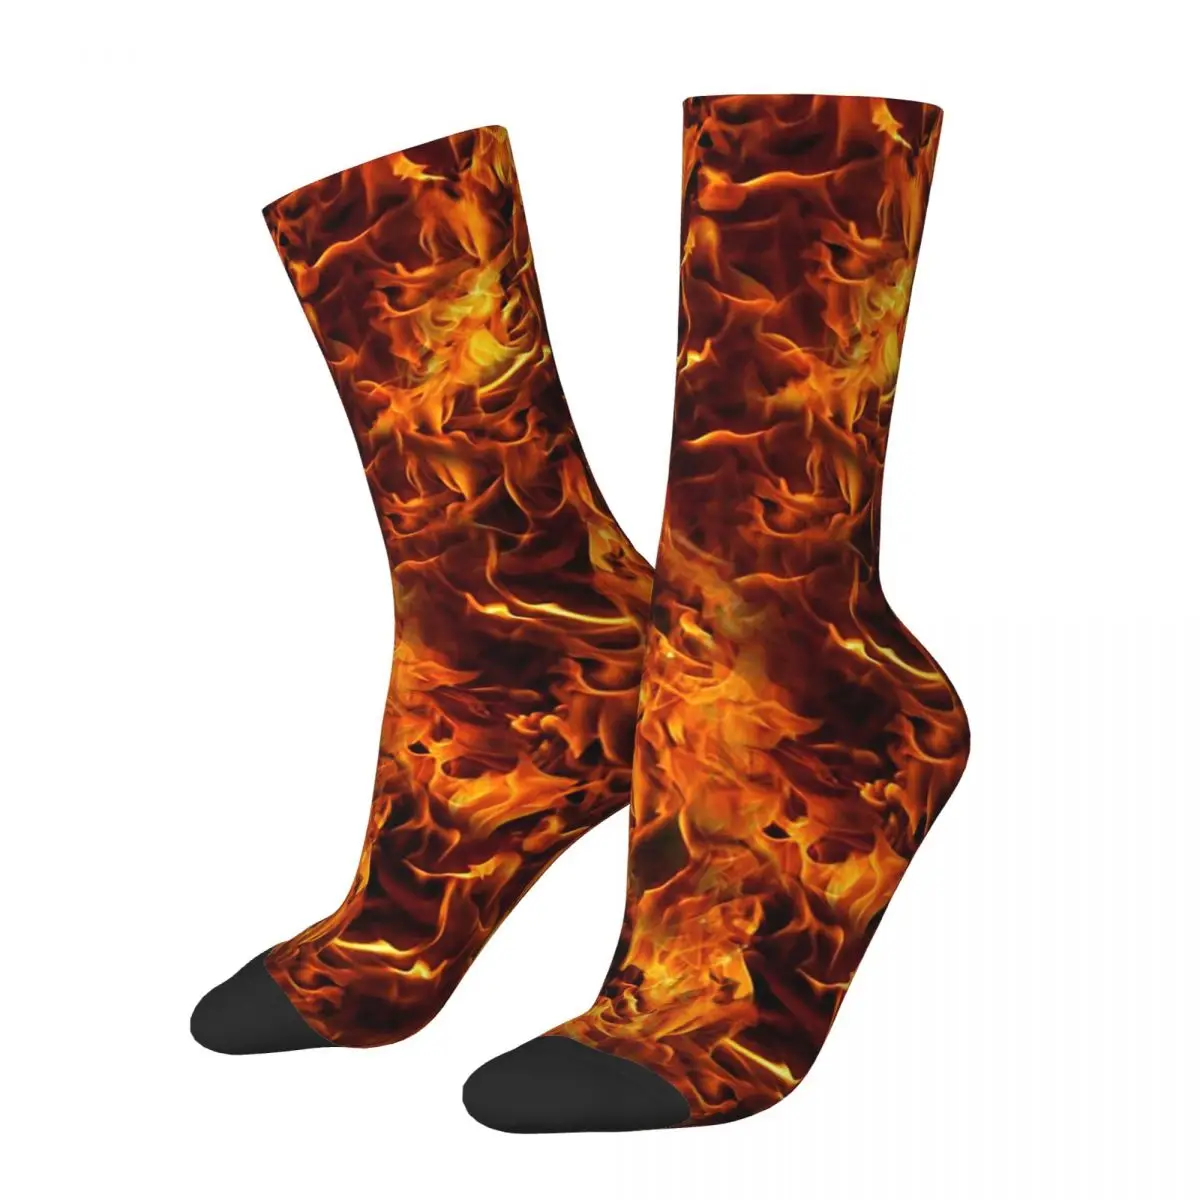 

Fire And Flames Pattern Socks Harajuku High Quality Stockings All Season Long Socks Accessories for Man's Woman's Gifts